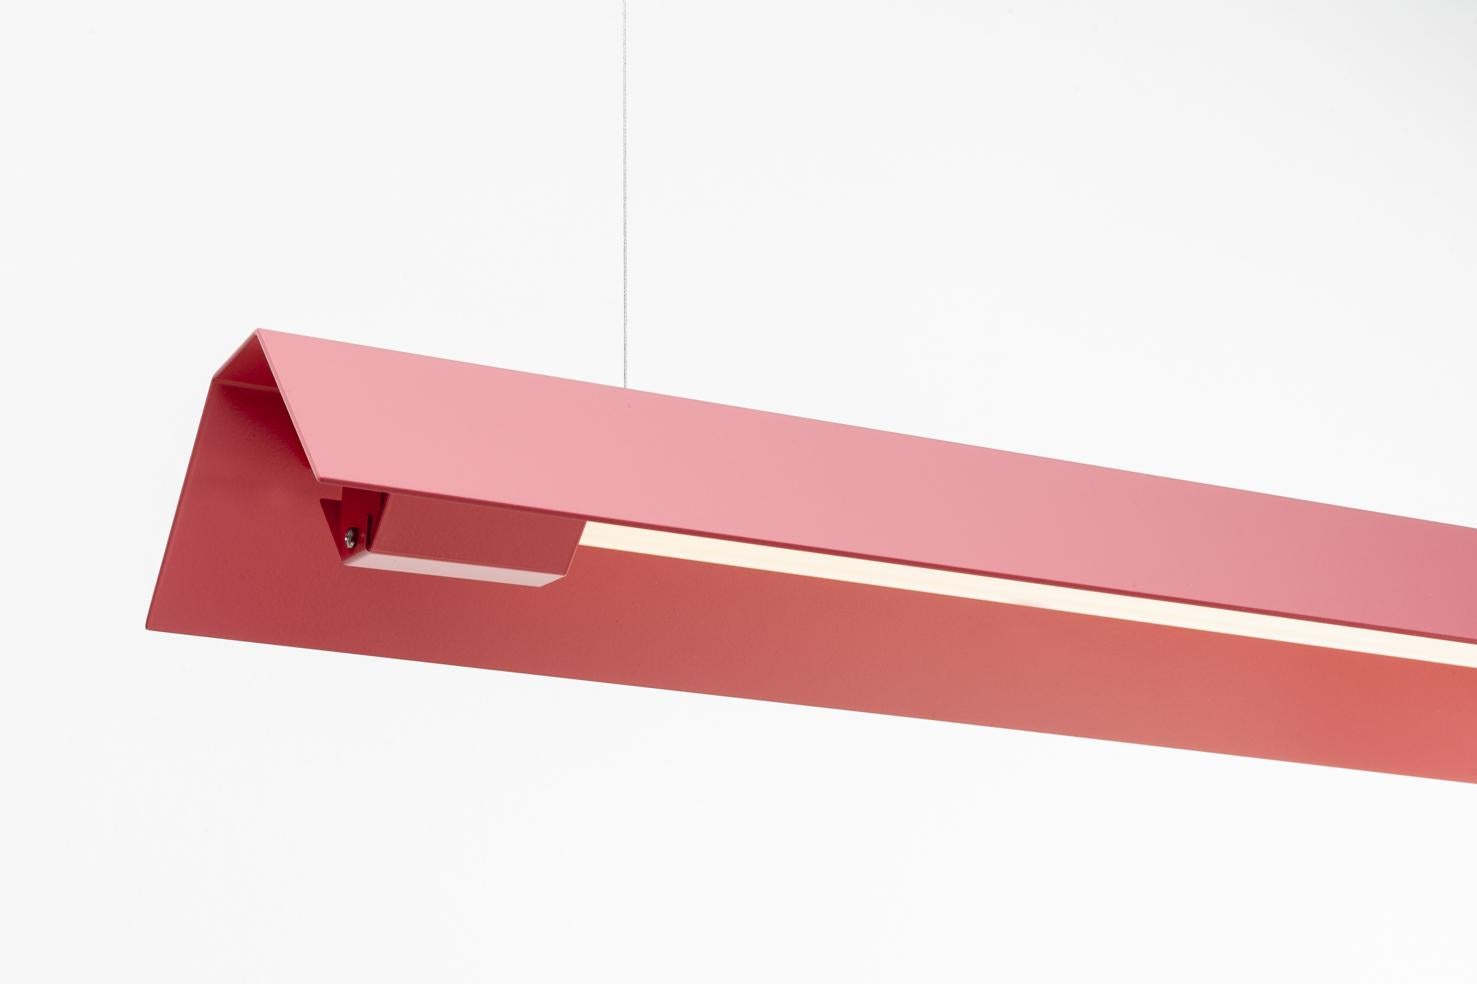 Large Misalliance ral antique pink suspended light by Lexavala
Dimensions: D 16 x W 130 x H 8 cm
Materials: powder coated aluminium.

There are two lenghts of socket covers, extending over the LED. Two short are to be found in Suspended and